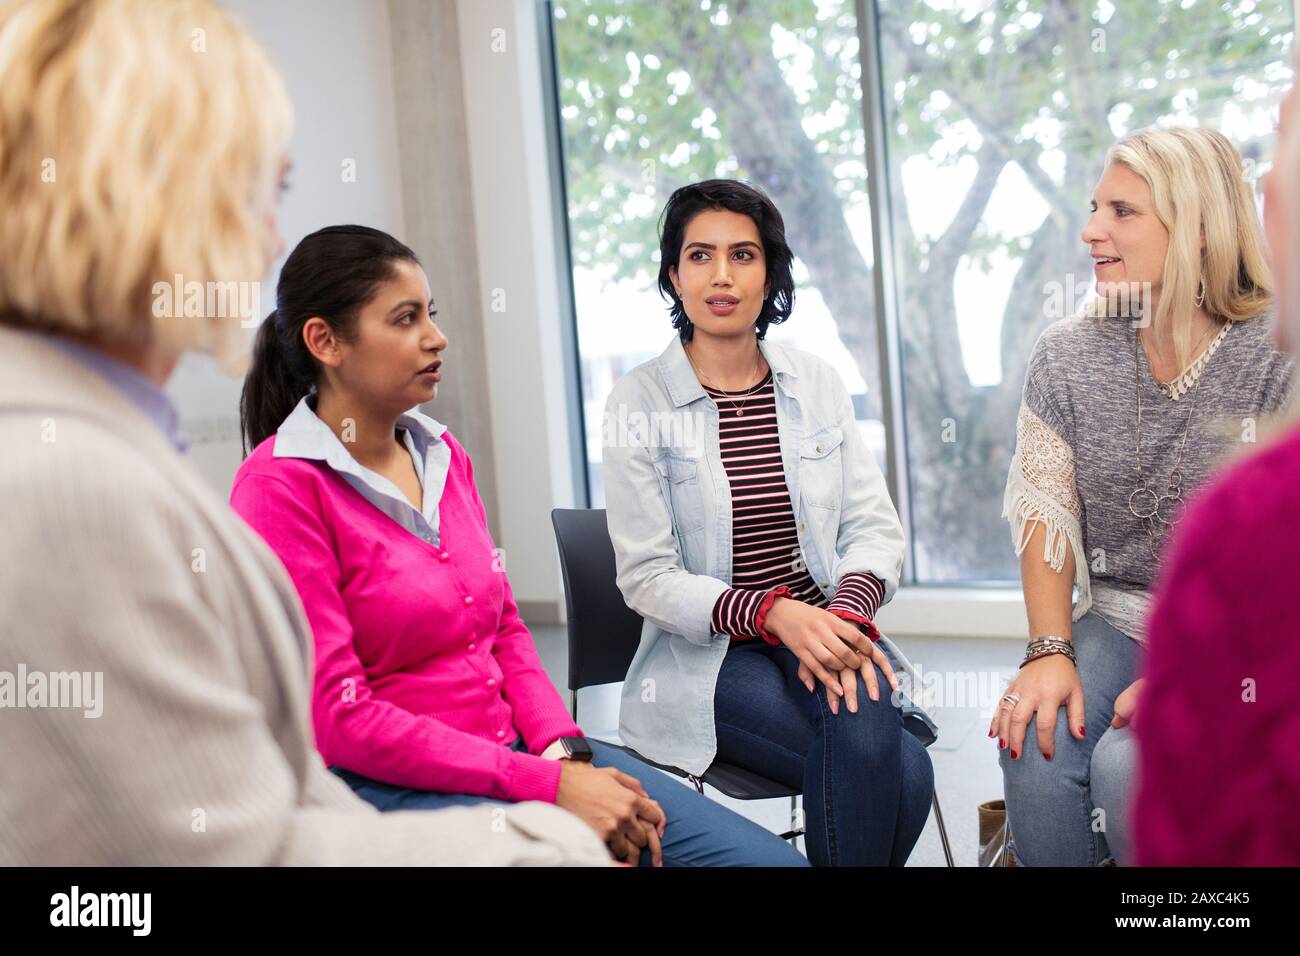 Women's support group talking in circle Stock Photo